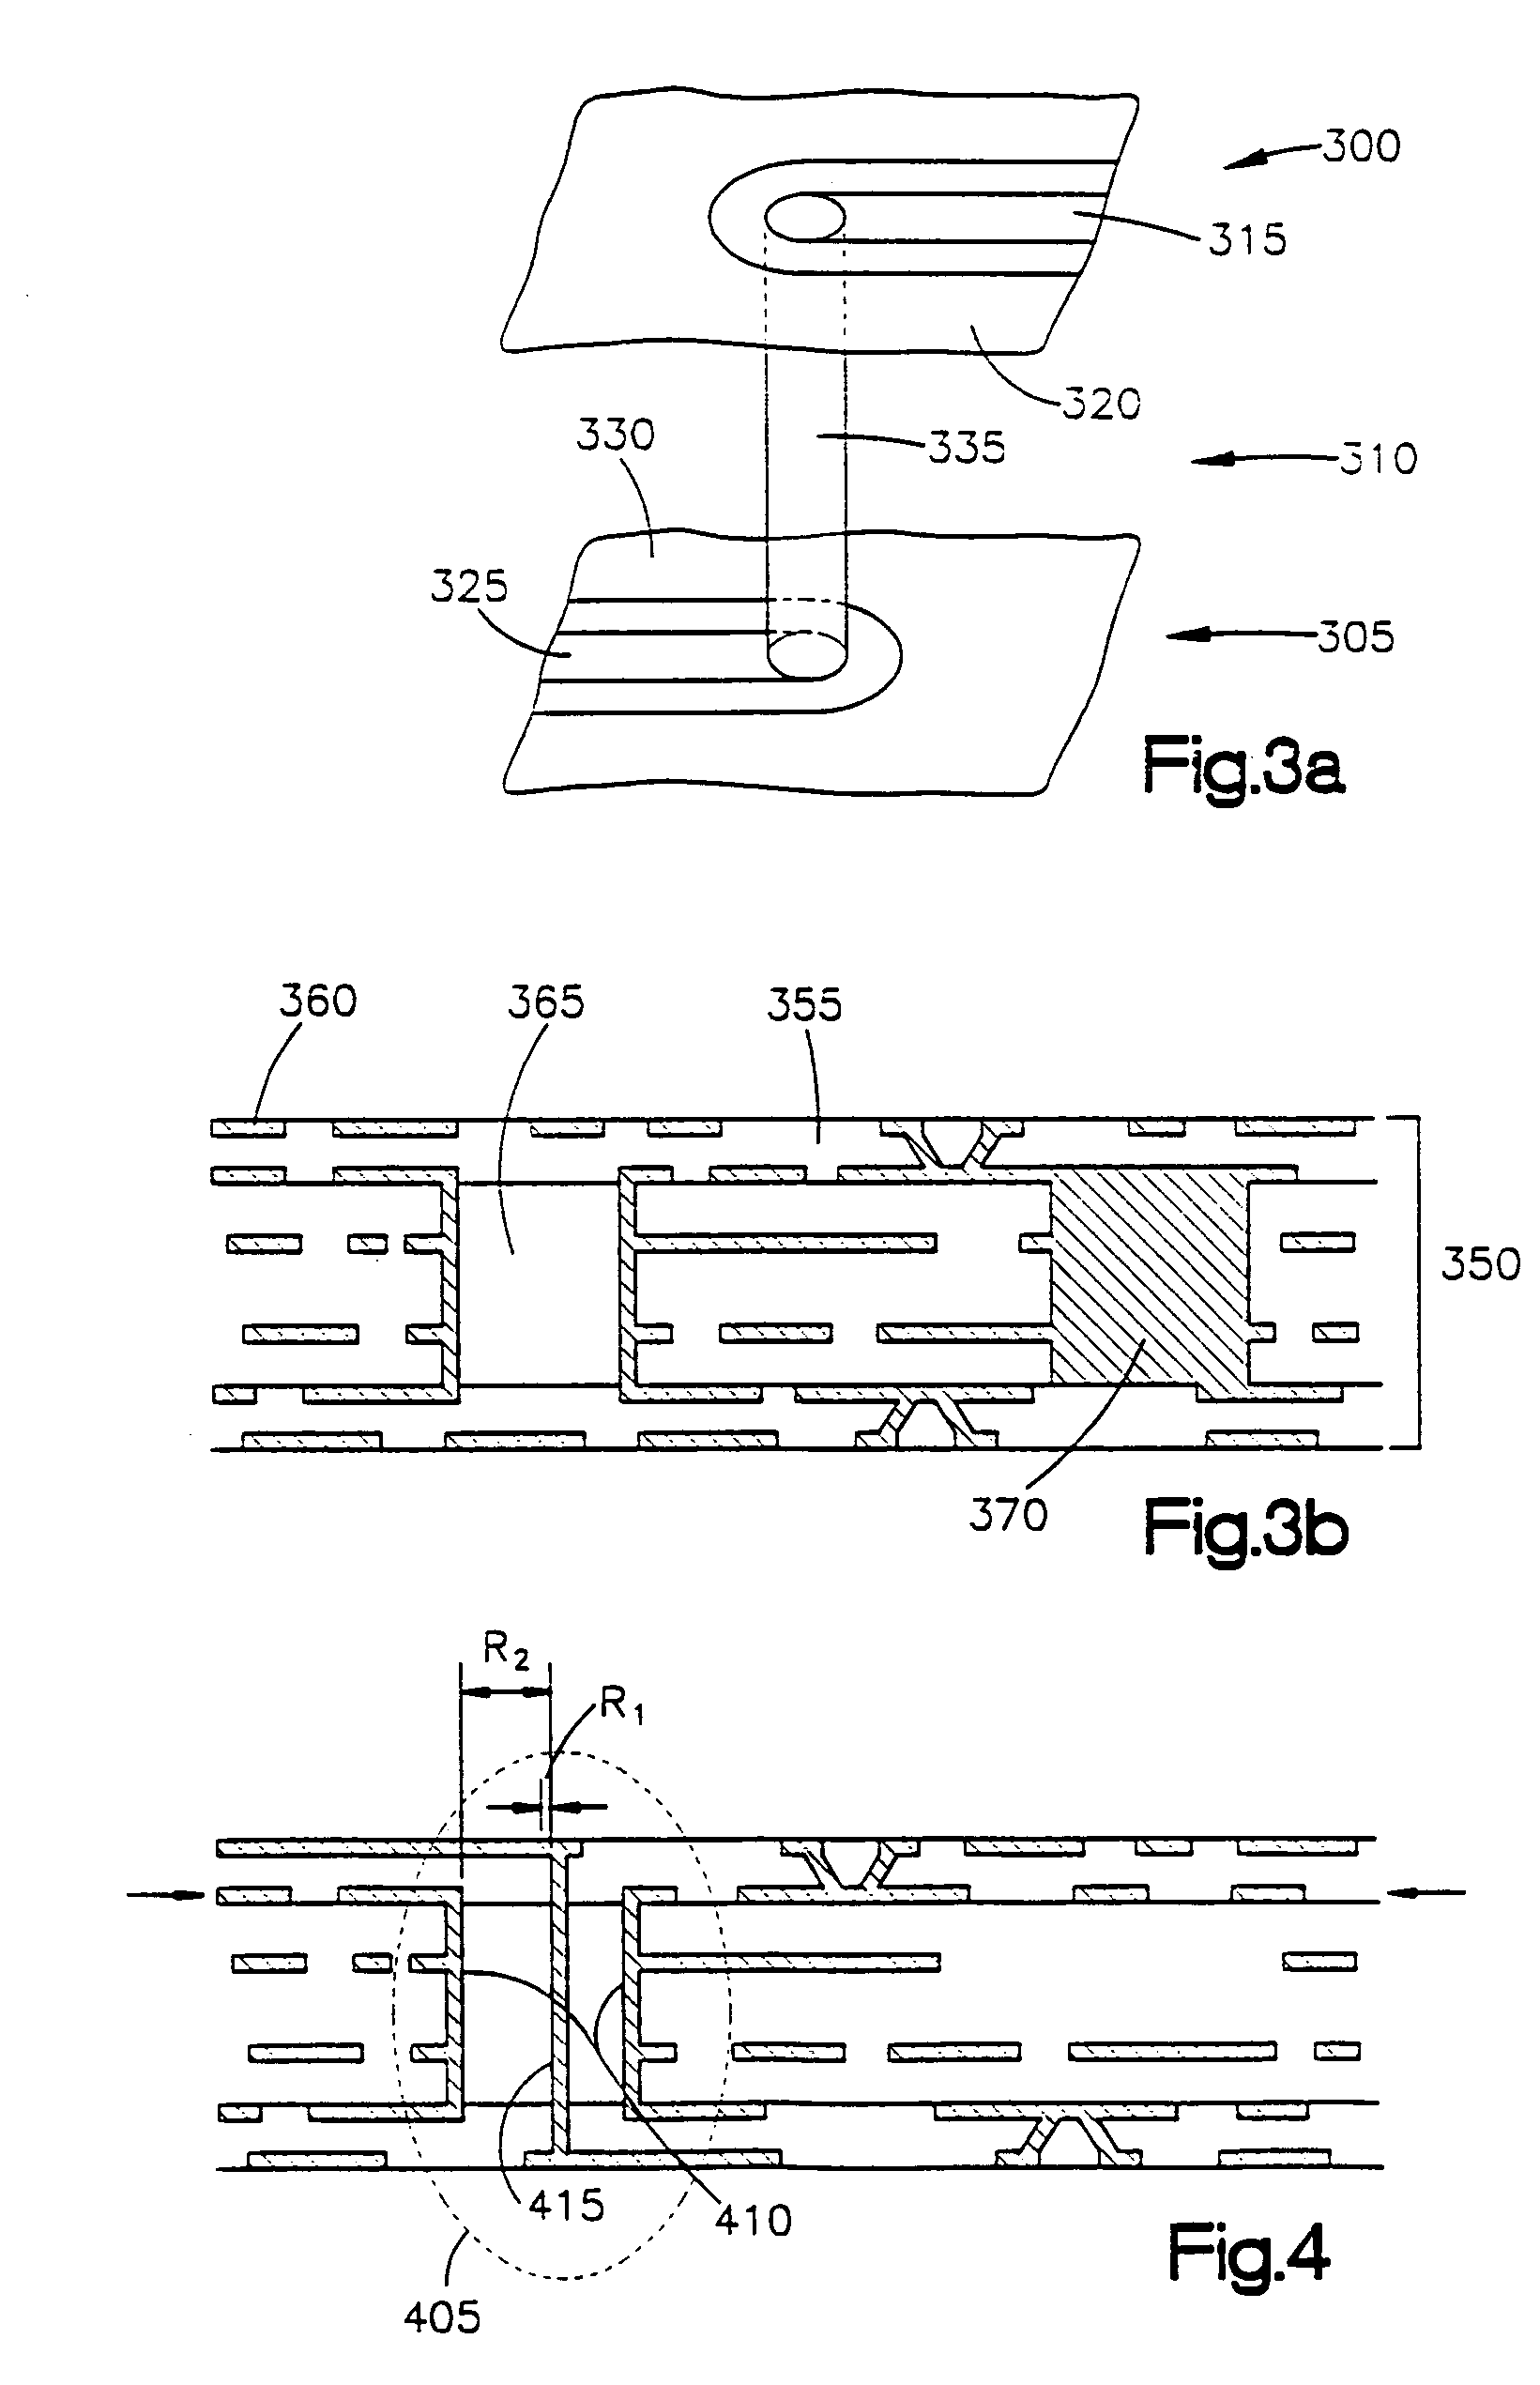 Coaxial via structure for optimizing signal transmission in multiple layer electronic device carriers